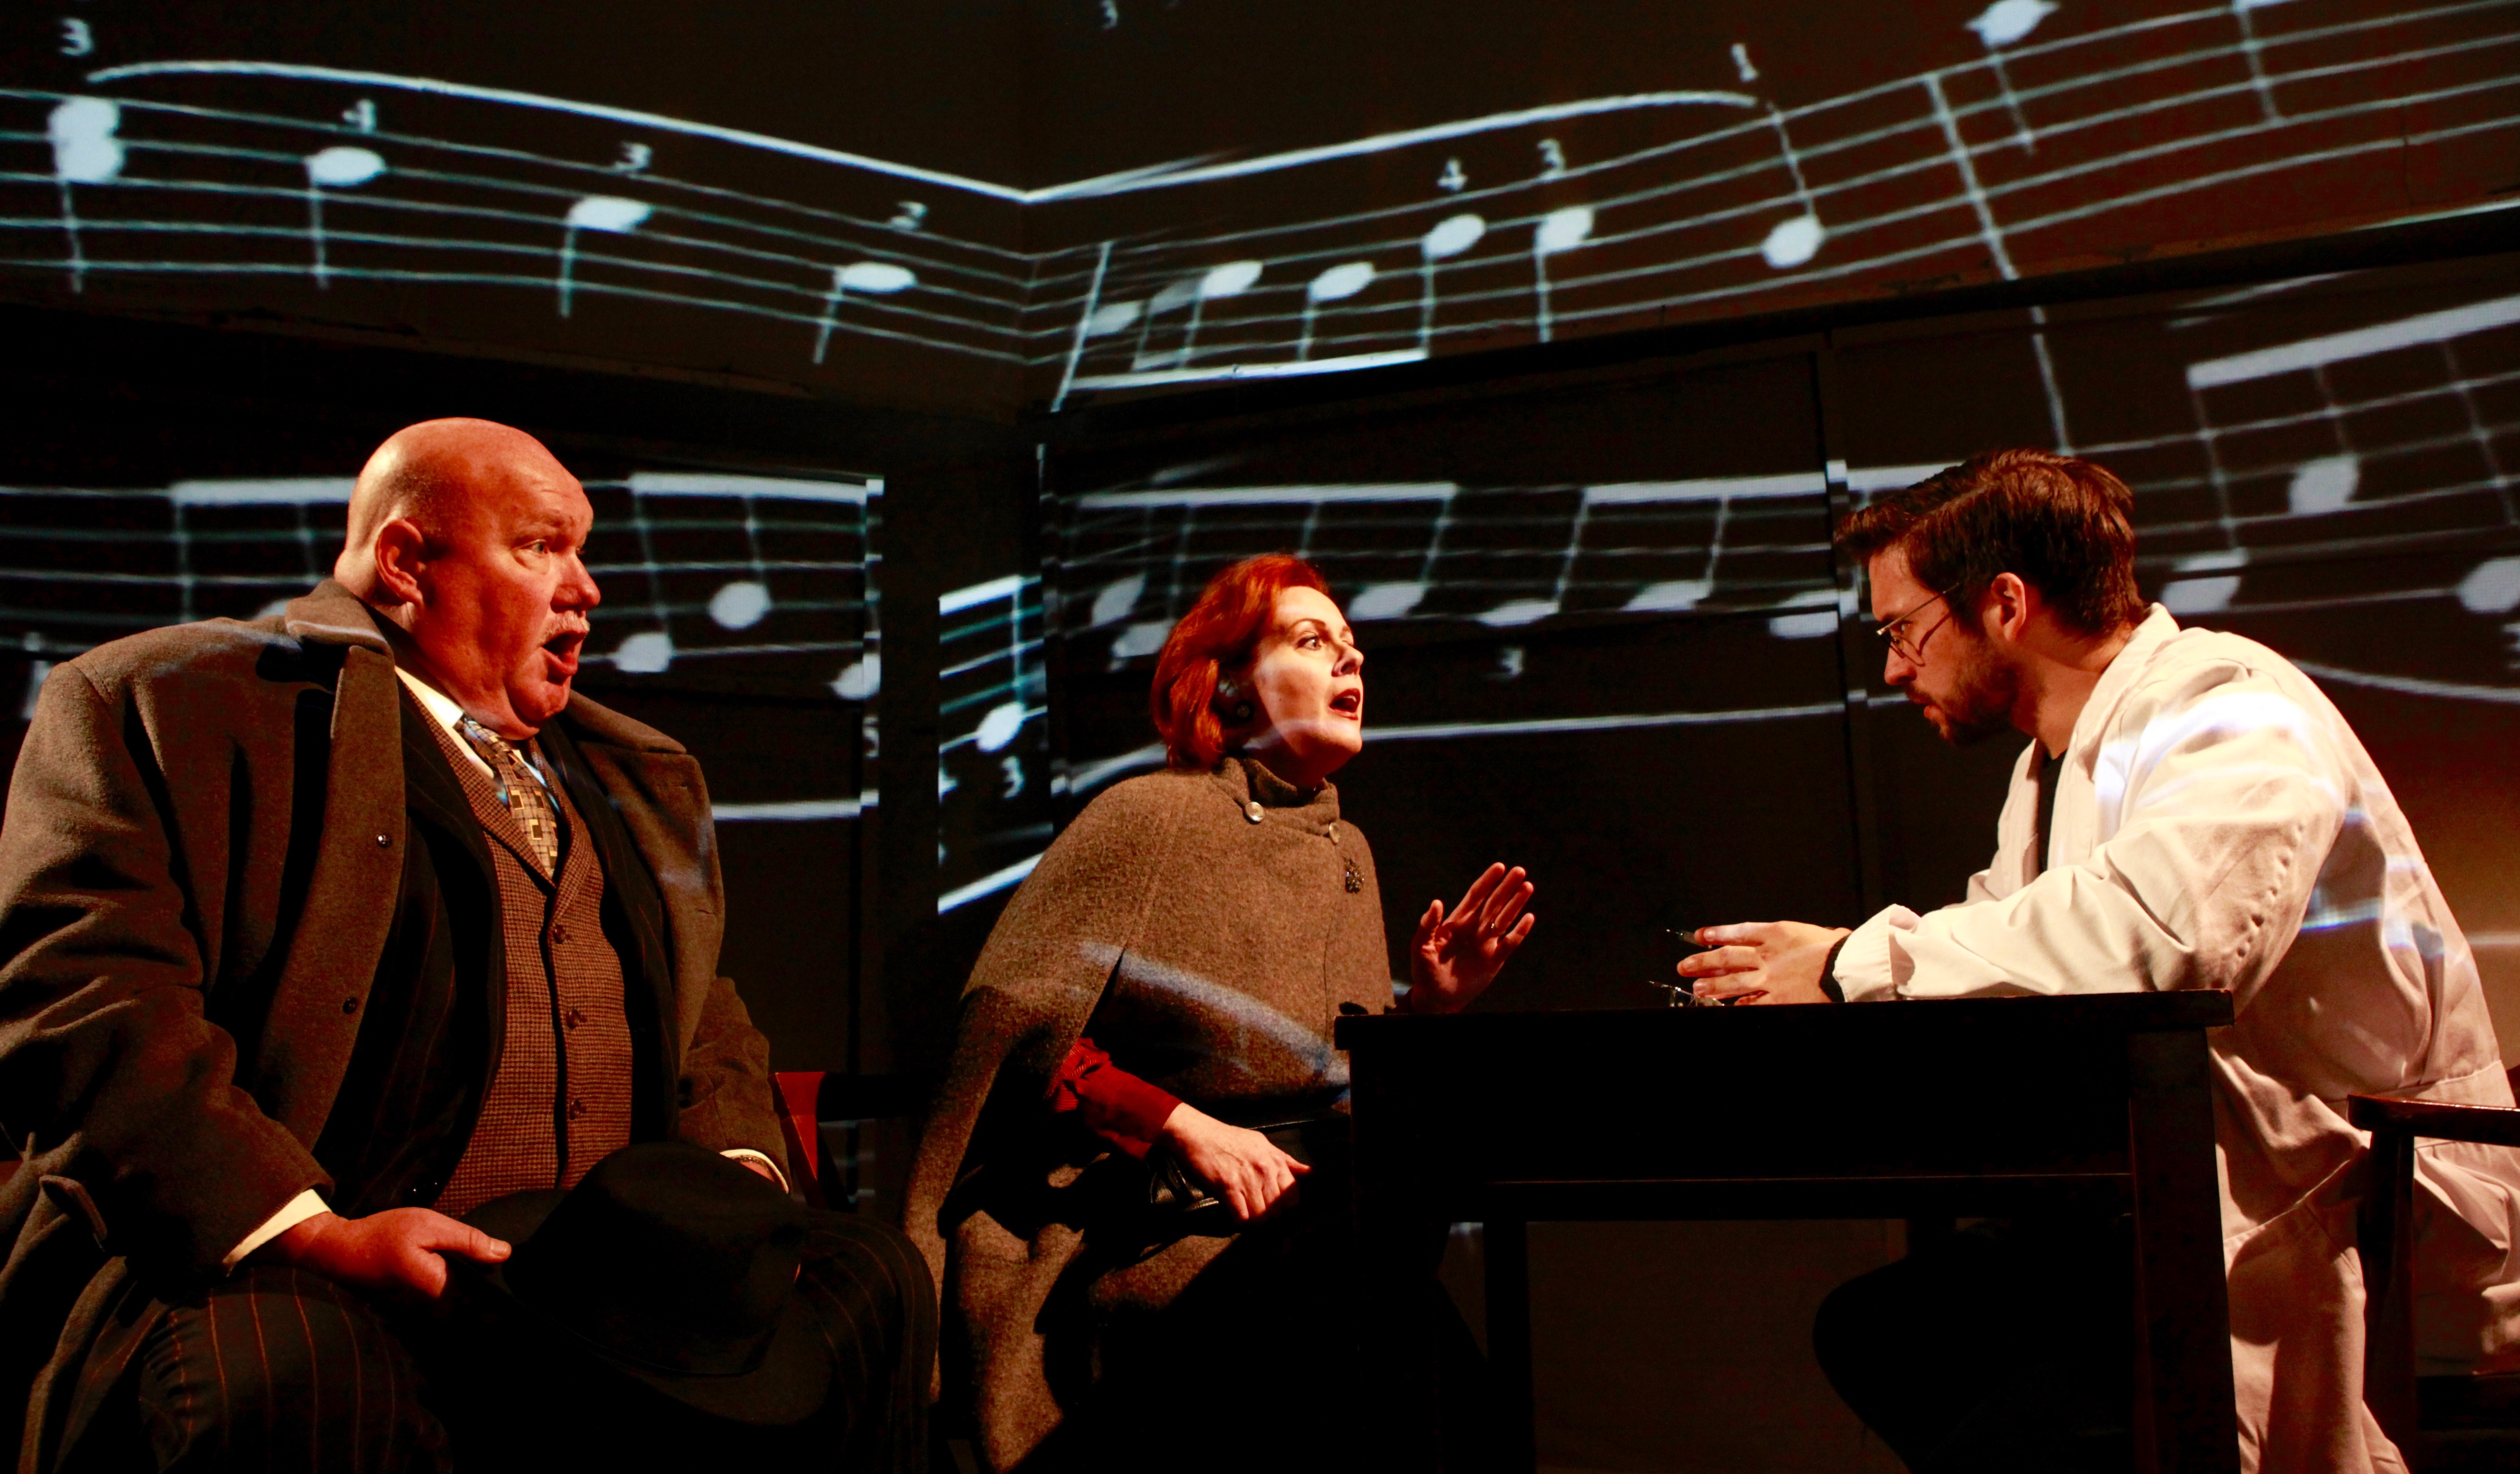 That's no Christmas carol; it's "The Man Who Mistook His Wife For A Hat." Quantum Theatre's production of this modern opera features (L to R) bass Kevin Glavin, soprano Katy Williams, and tenor Ian McEuen.